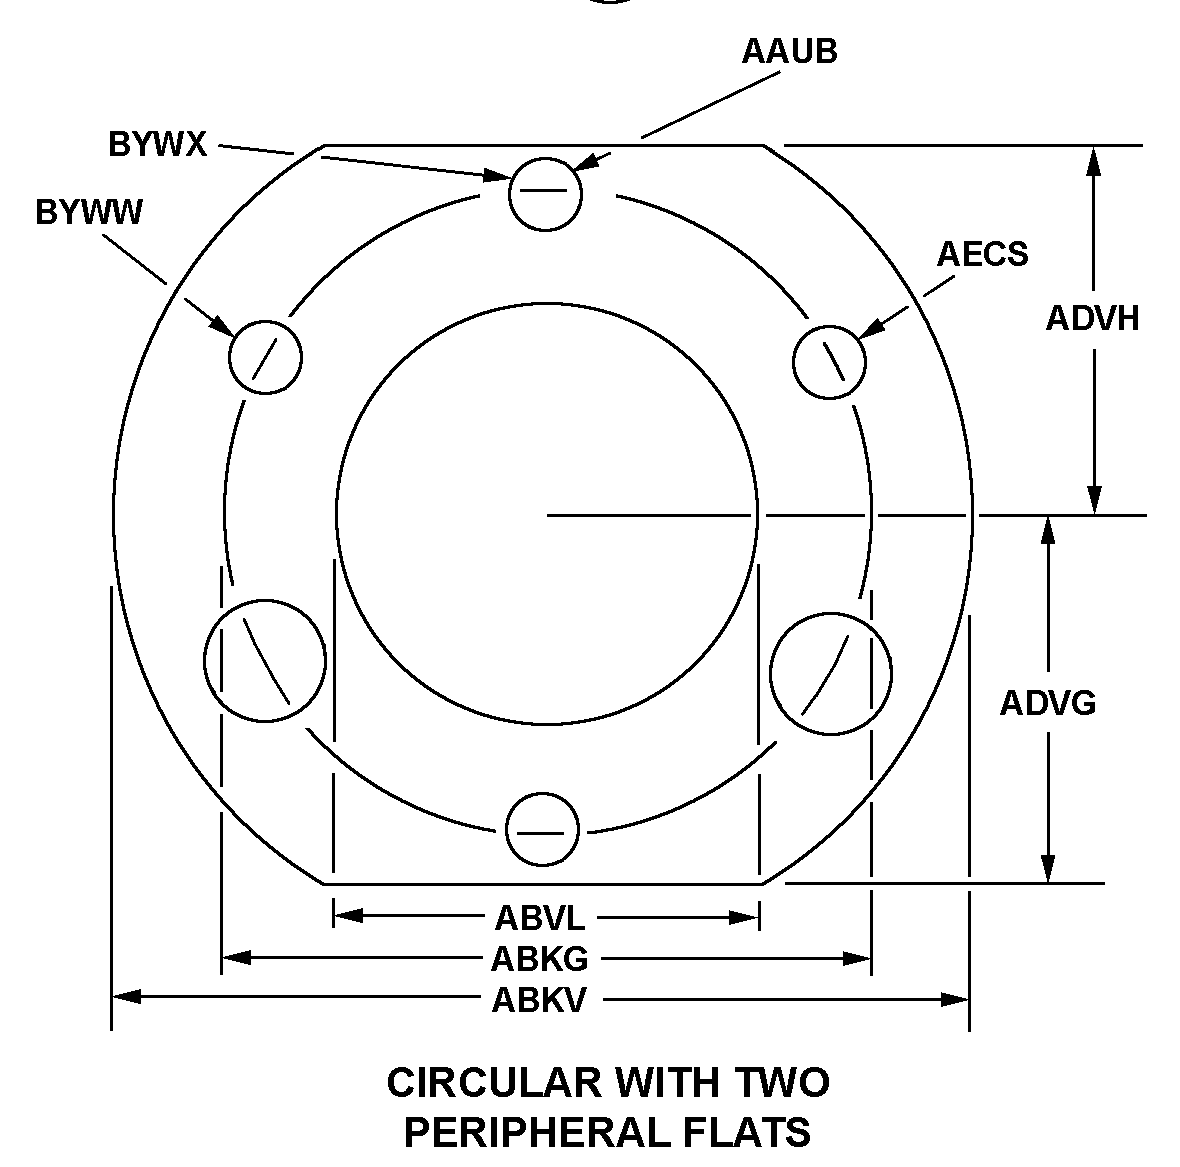 CIRCULAR WITH TWO PERIPHERAL FLATS style nsn 5330-01-013-3588